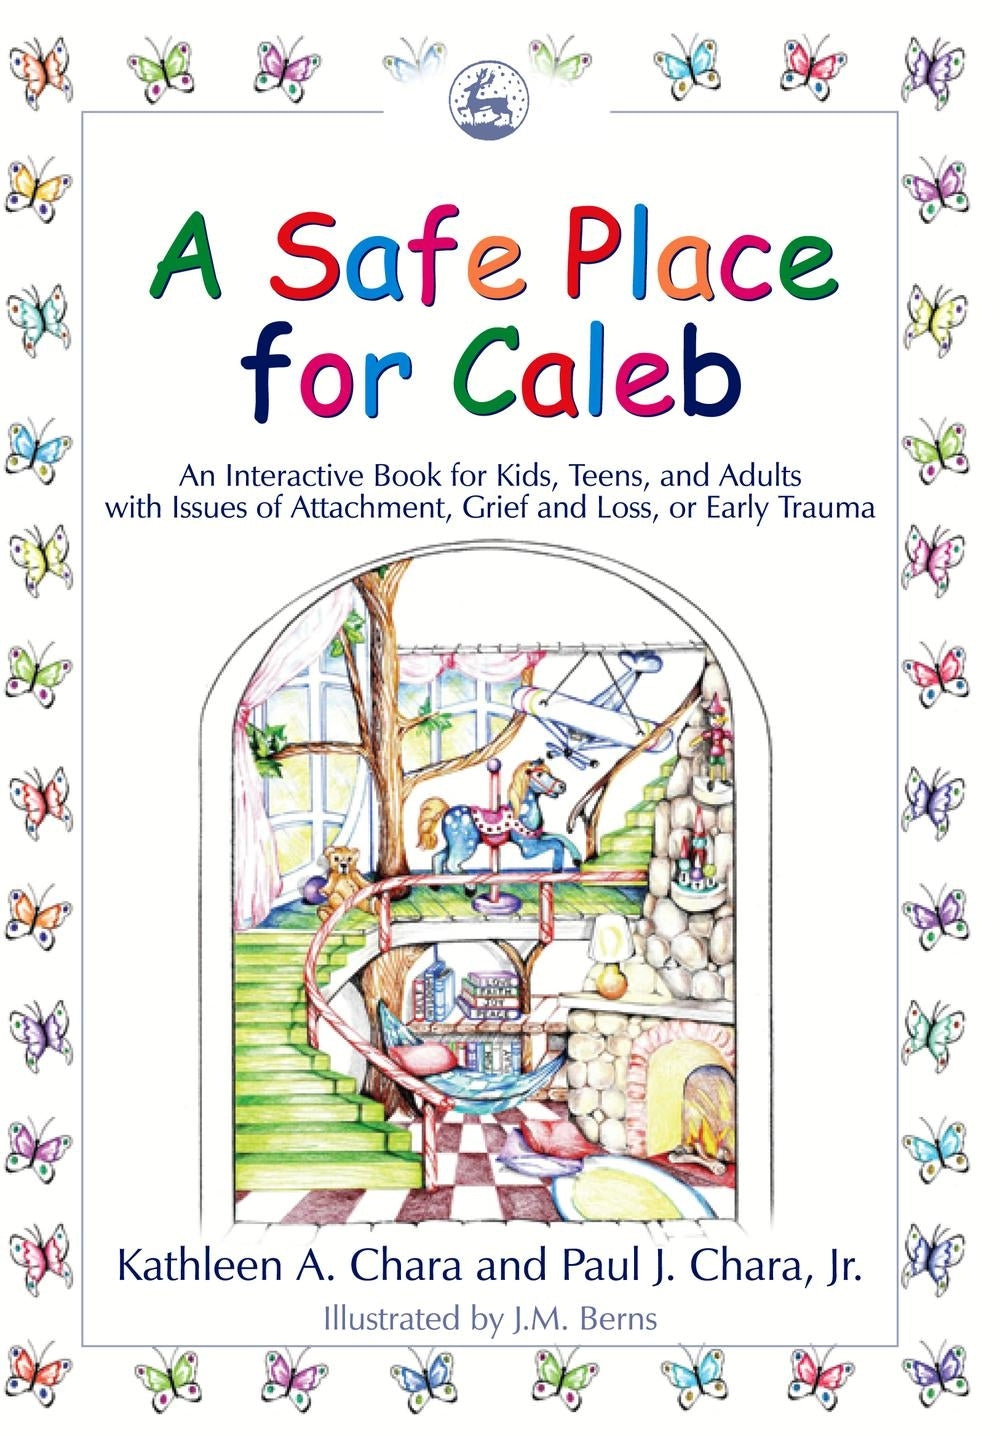 A Safe Place for Caleb by Jane M. Berns, Paul J. Chara, Kathleen A. Chara